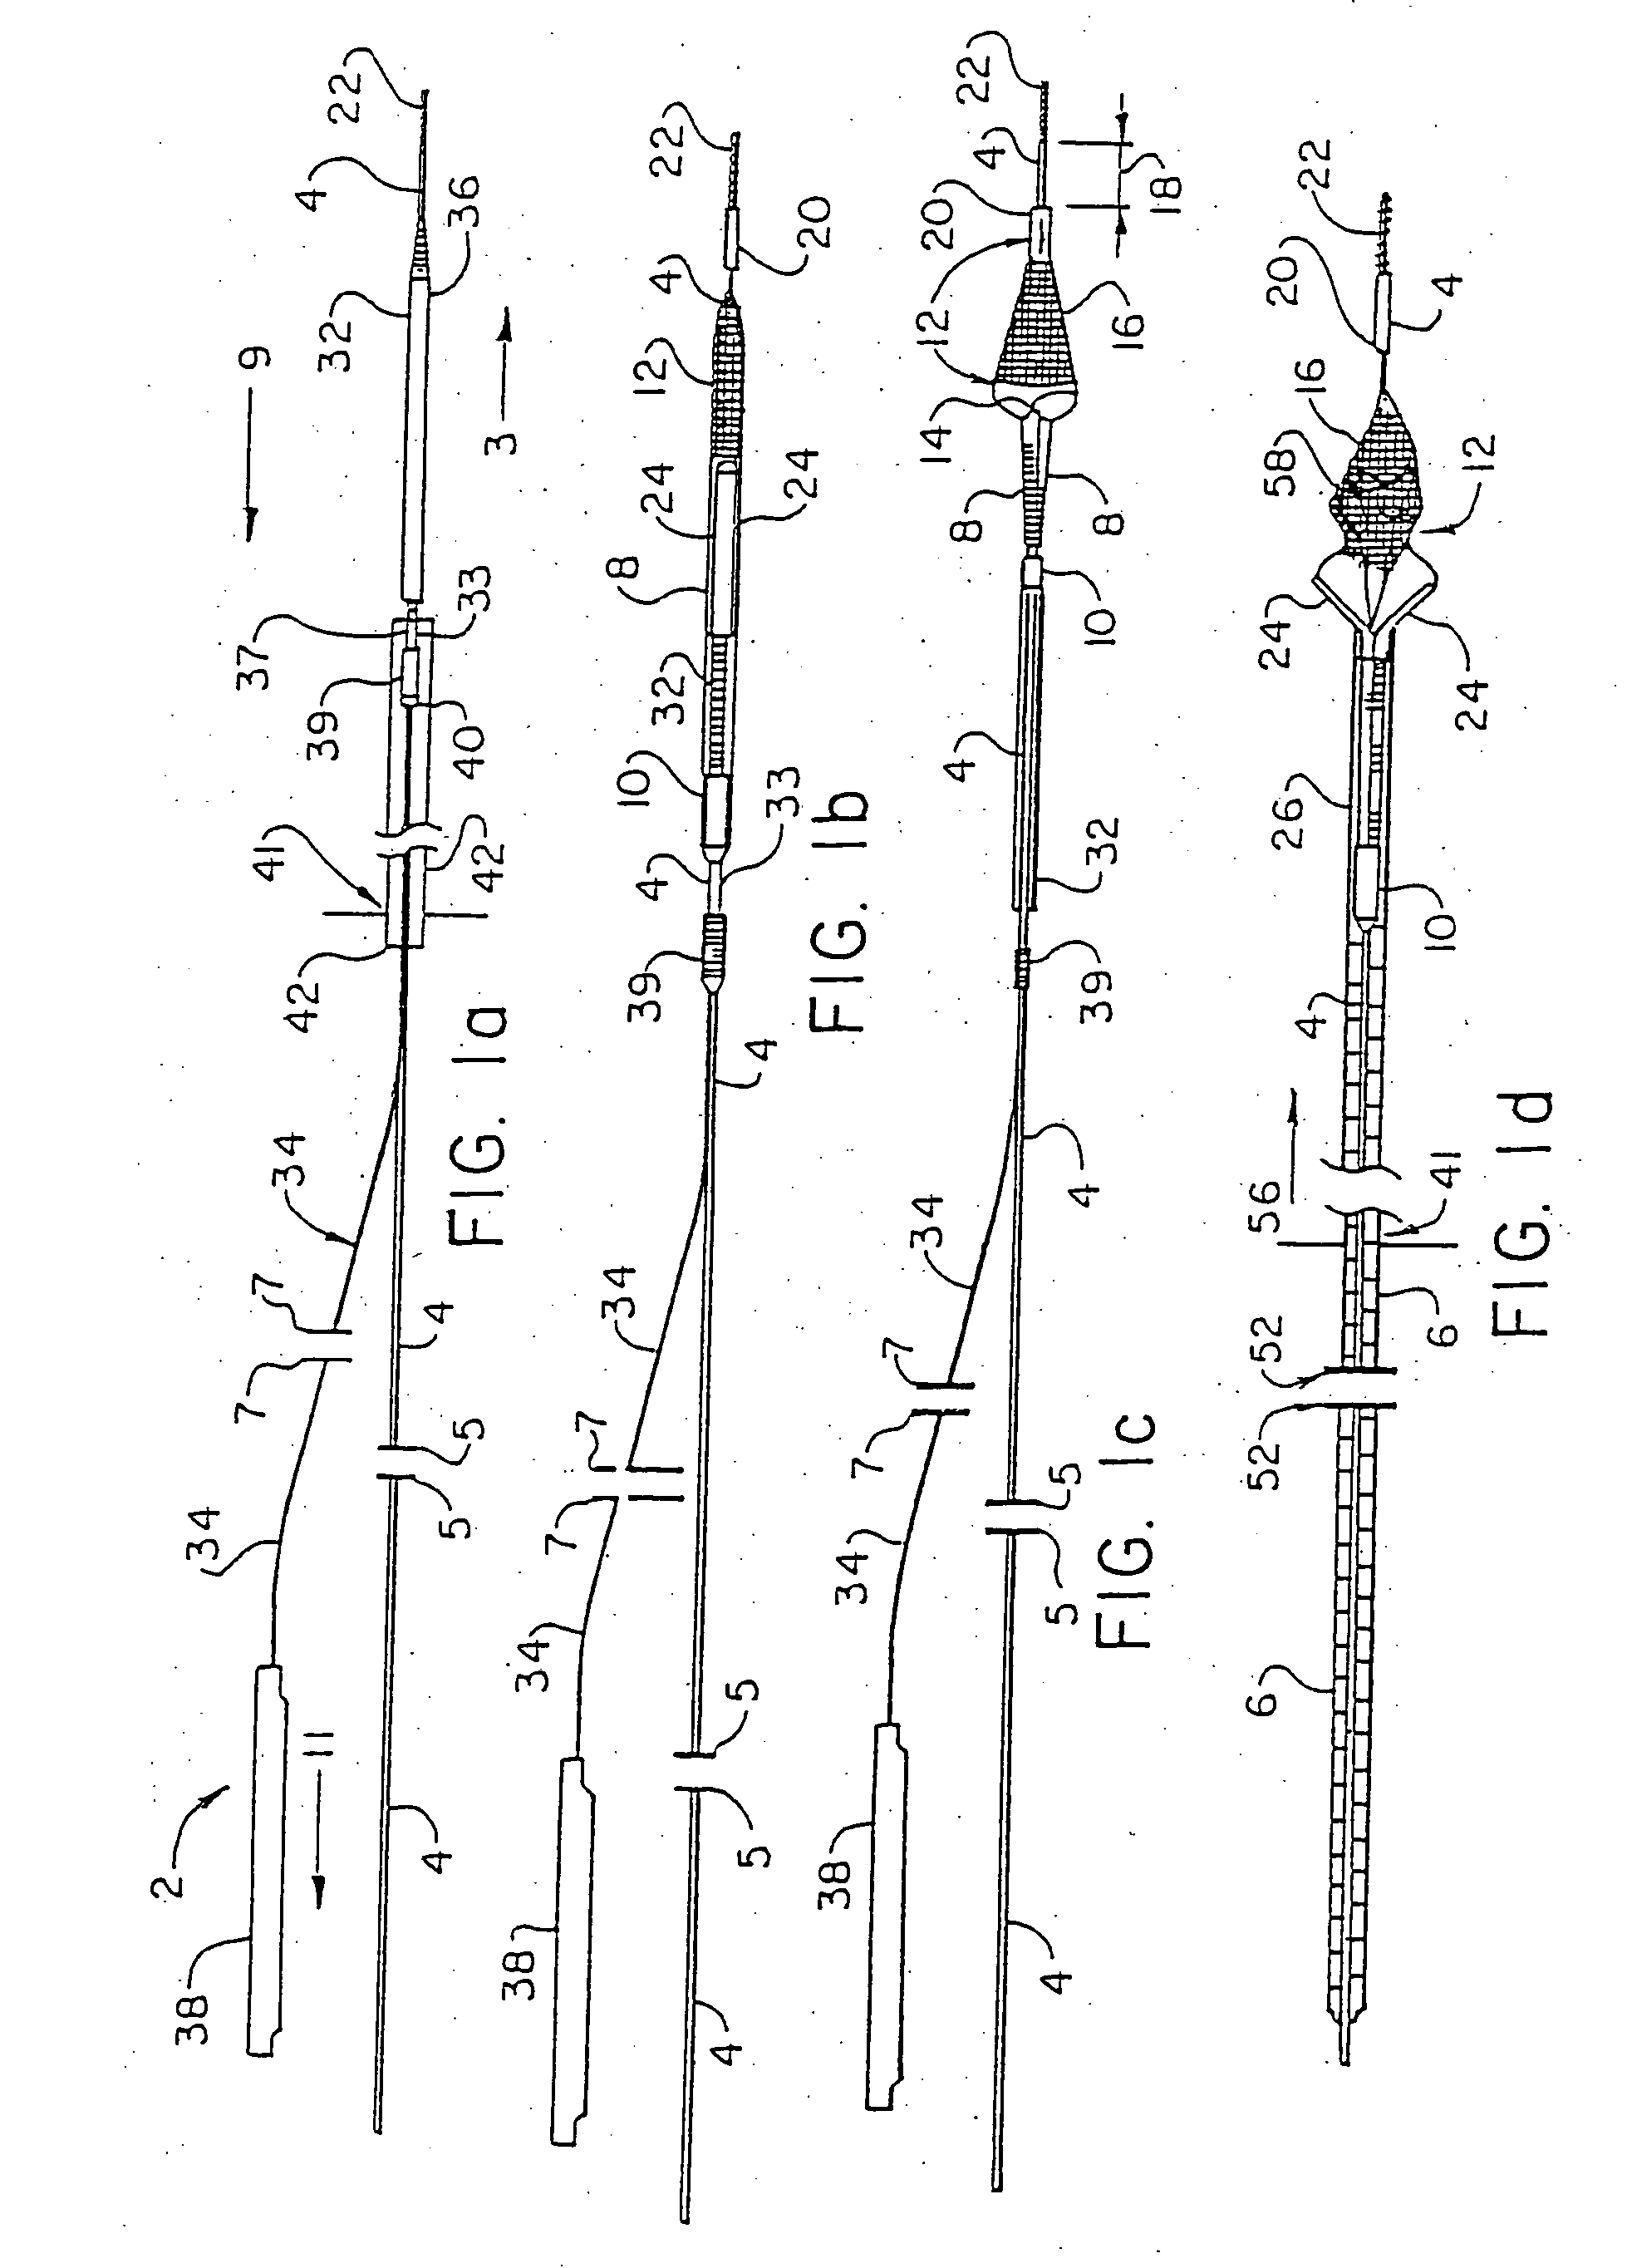 Apparatus for capturing objects beyond an operative site utilizing a capture device delivered on a medical guide wire